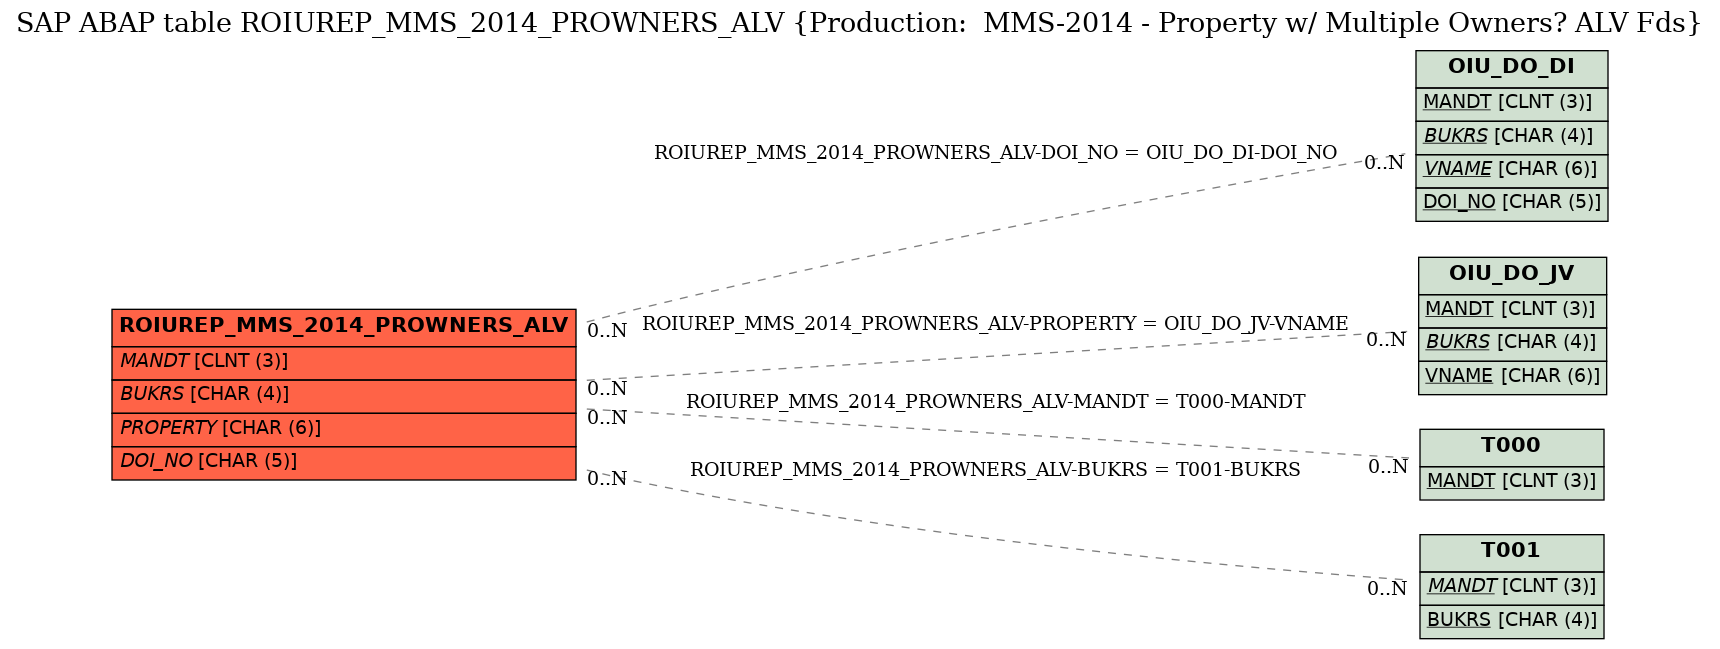 E-R Diagram for table ROIUREP_MMS_2014_PROWNERS_ALV (Production:  MMS-2014 - Property w/ Multiple Owners? ALV Fds)